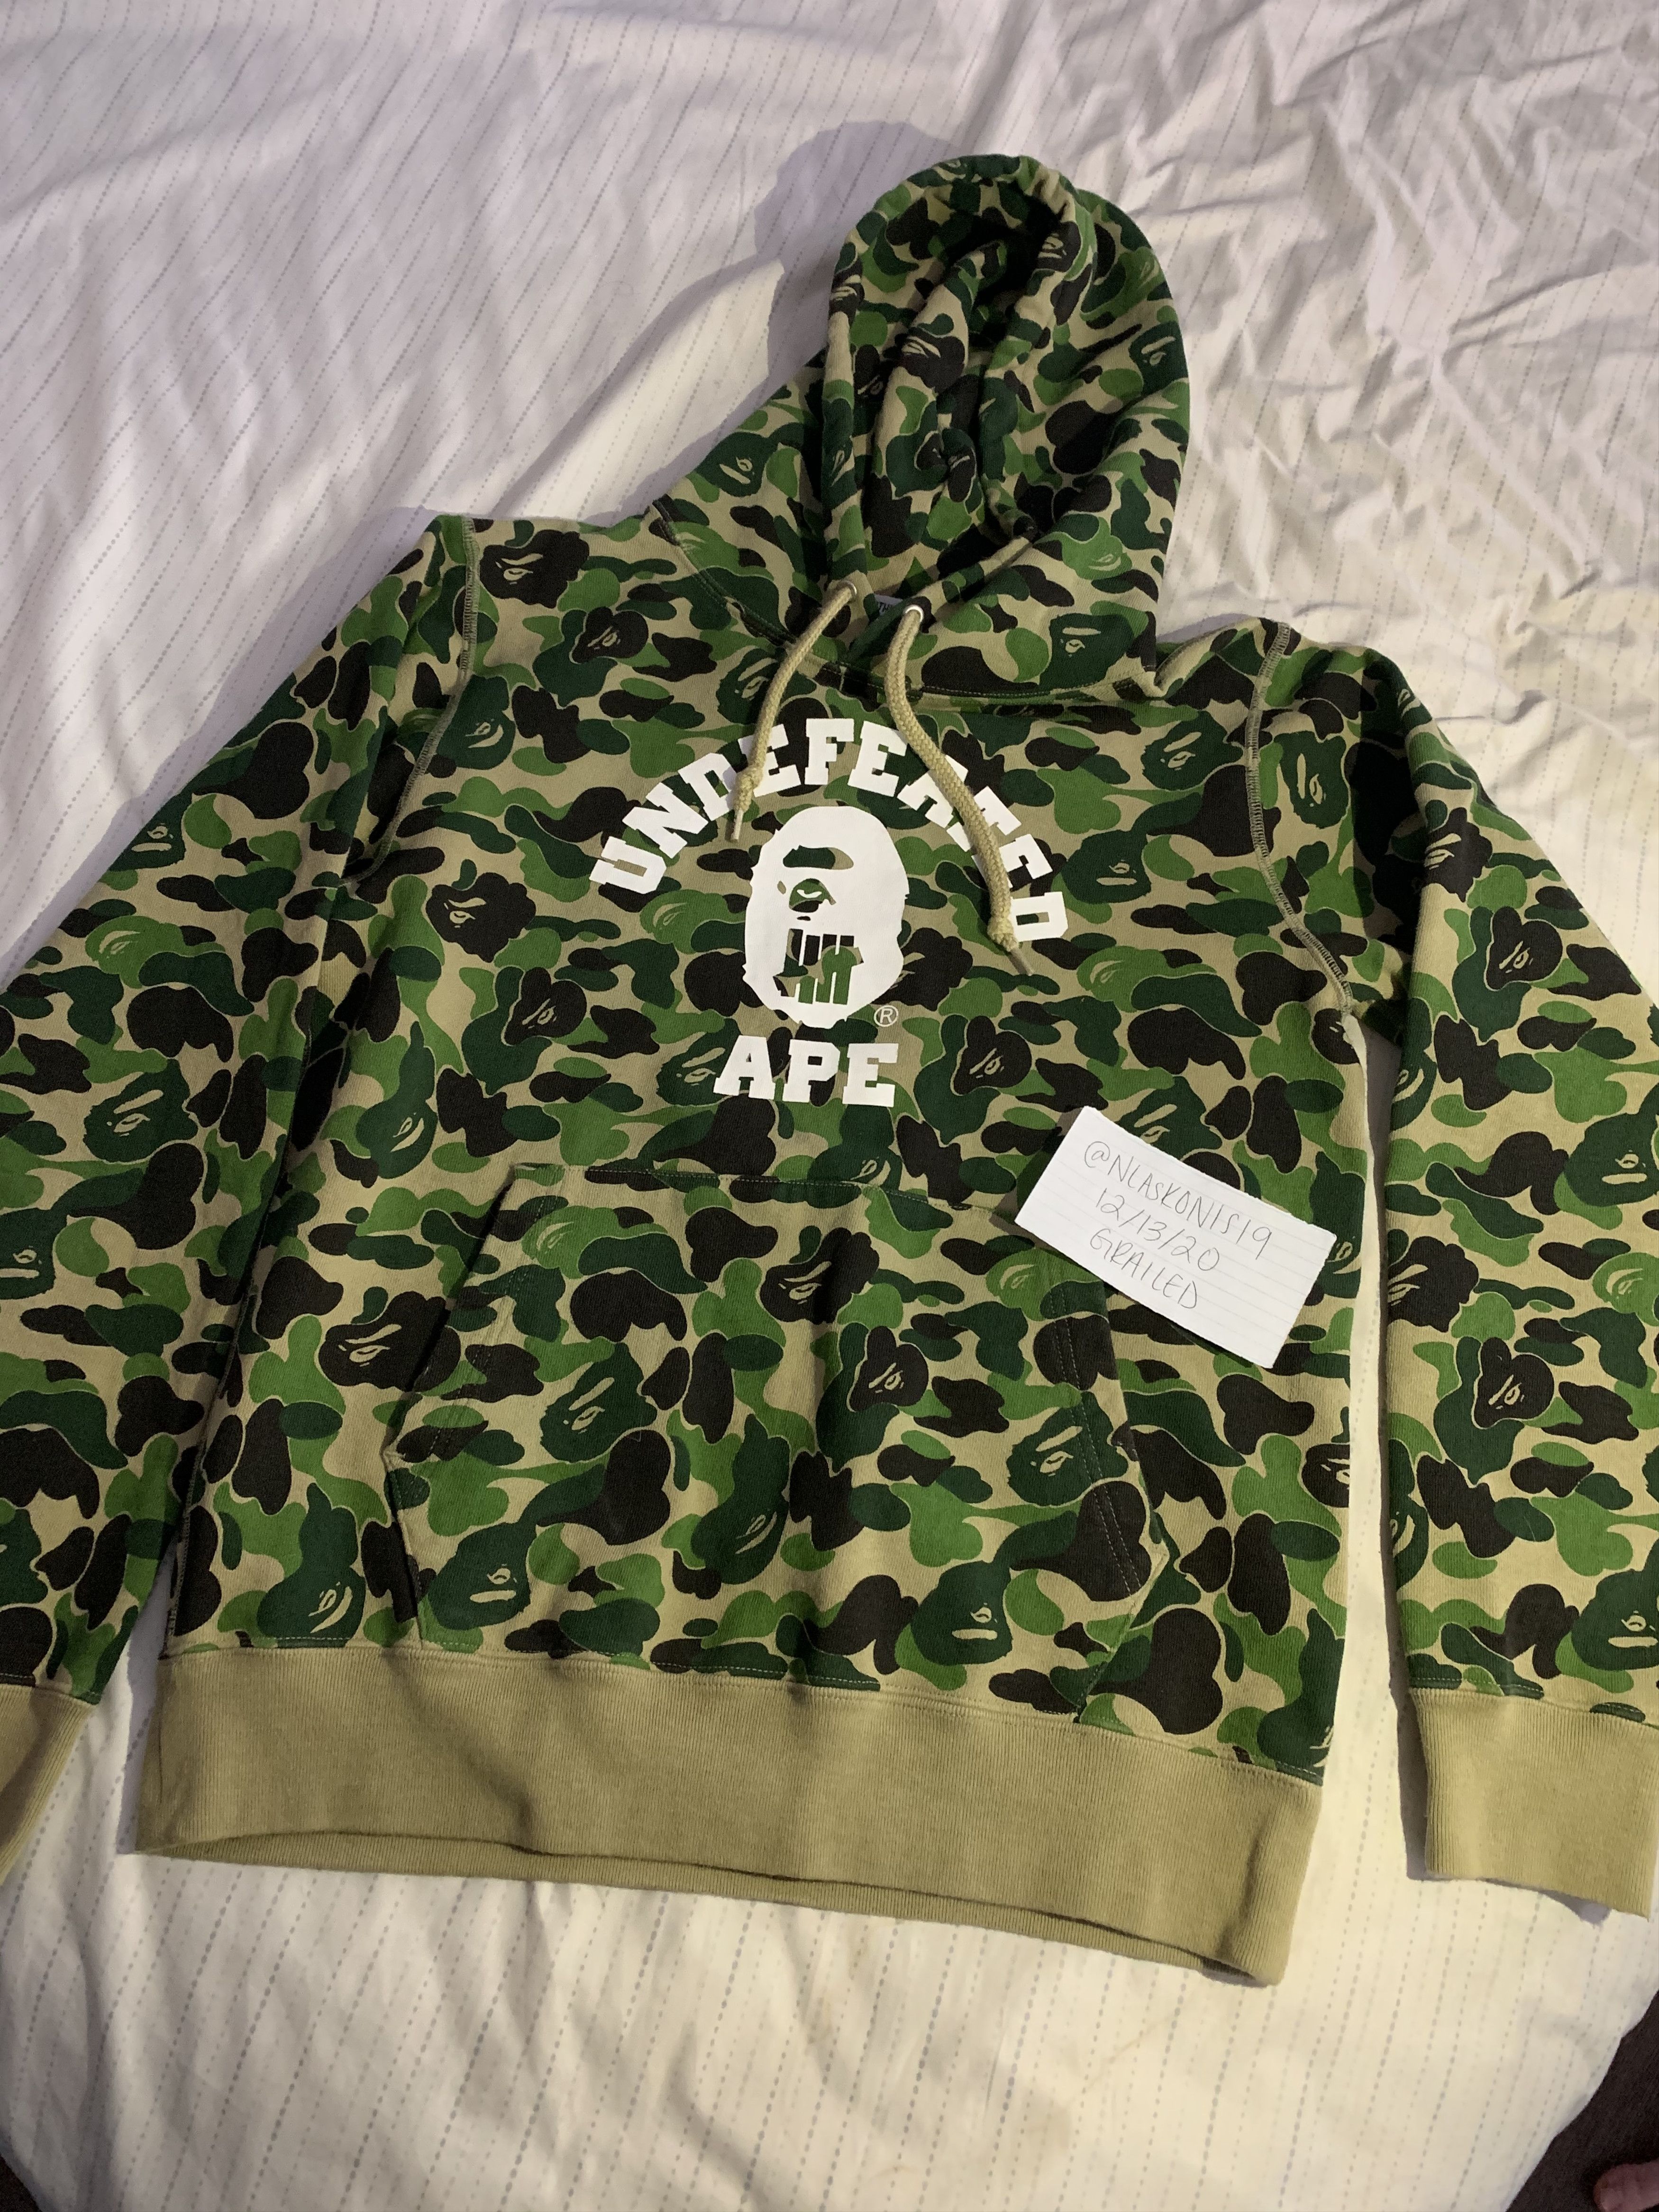 Bape Bape x Undefeated ABC College Pullover Hoodie | Grailed